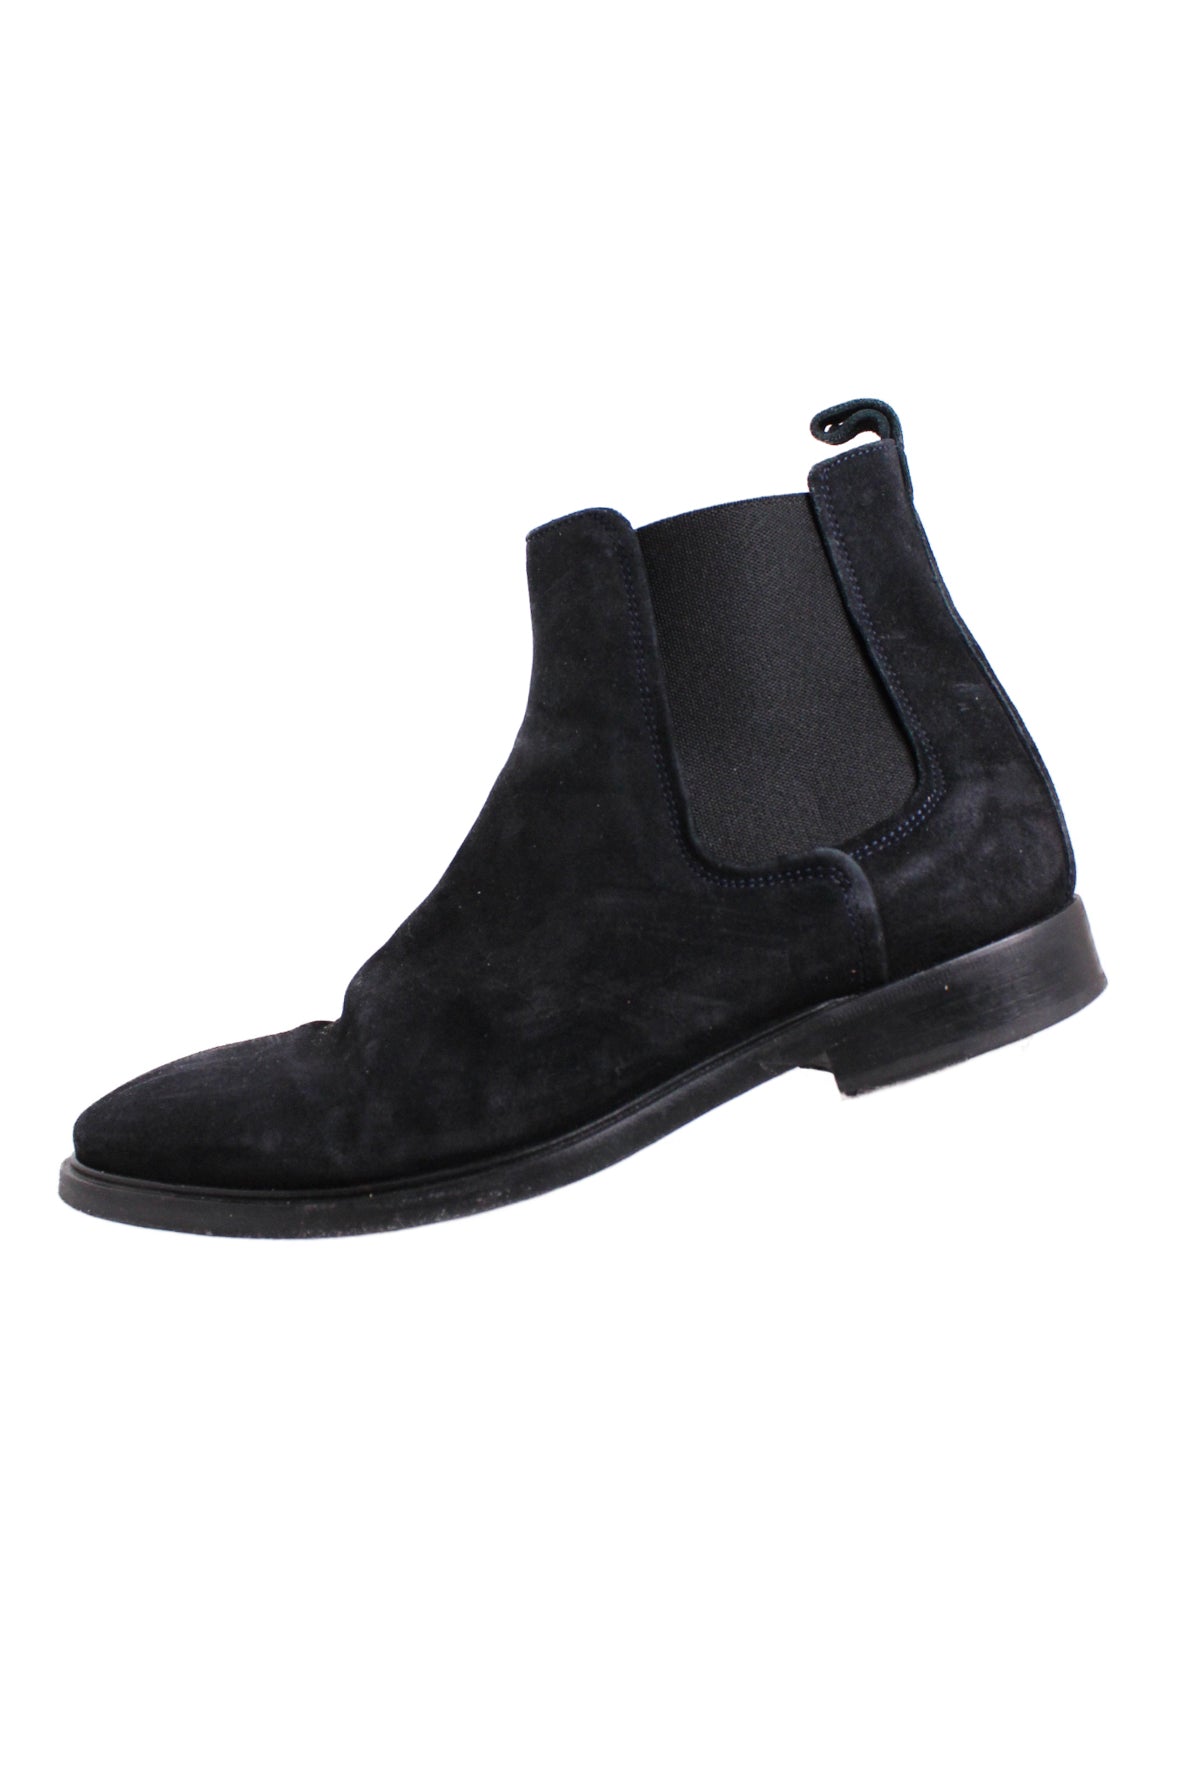 side angle of lanvin black leather suede chelsea boots. features pull tab, elastic gores for pull on fit, angled rounded toe, and leather sole. 